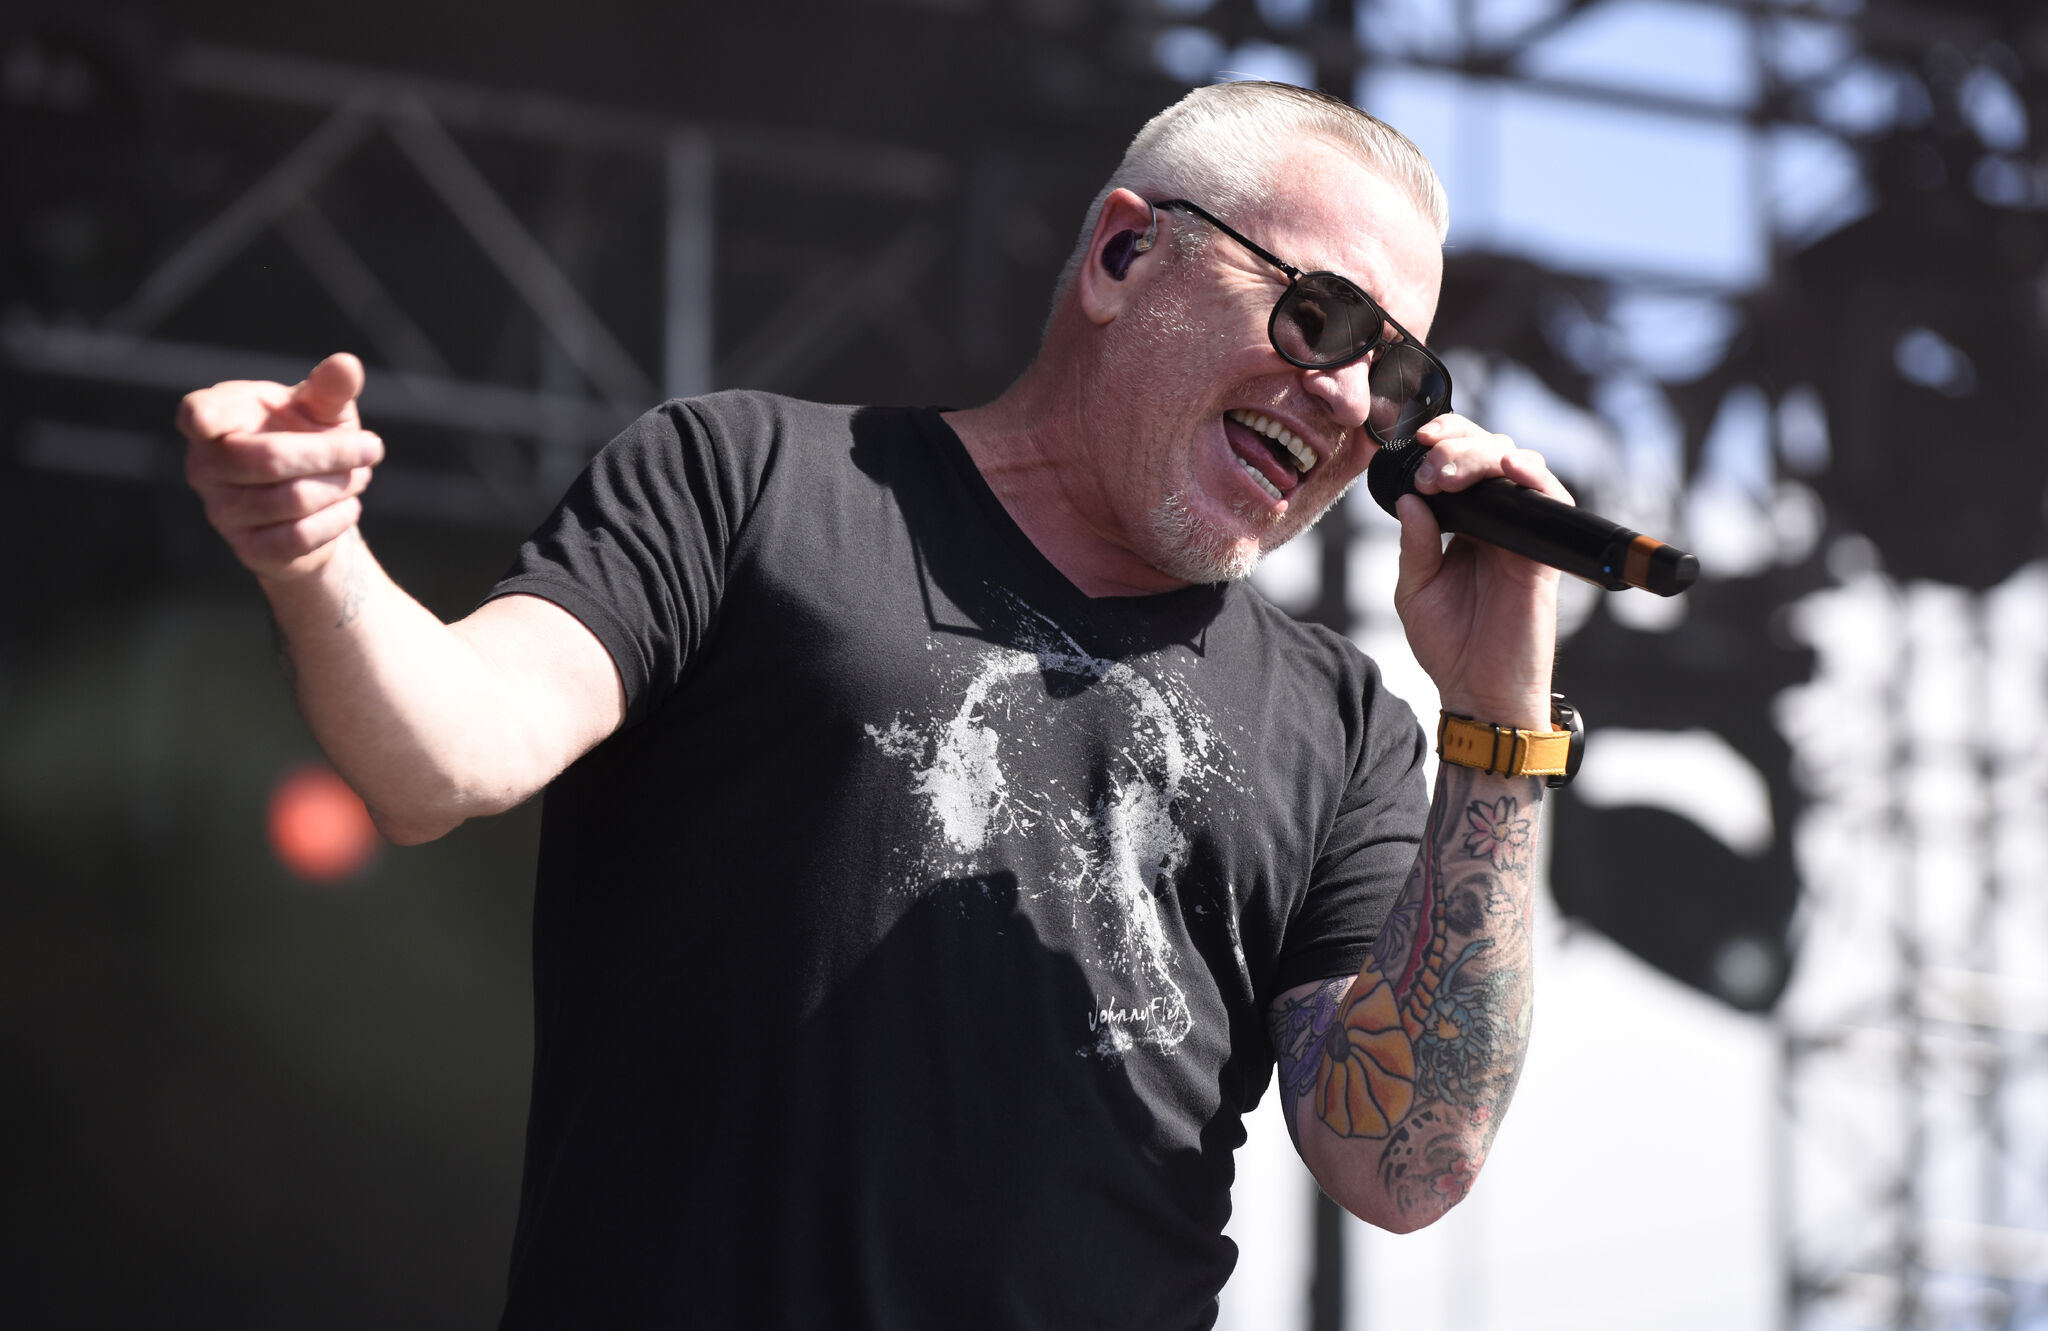 Singer Steve Harwell of the pop-rock band Smash Mouth dies at 56, Obituaries News